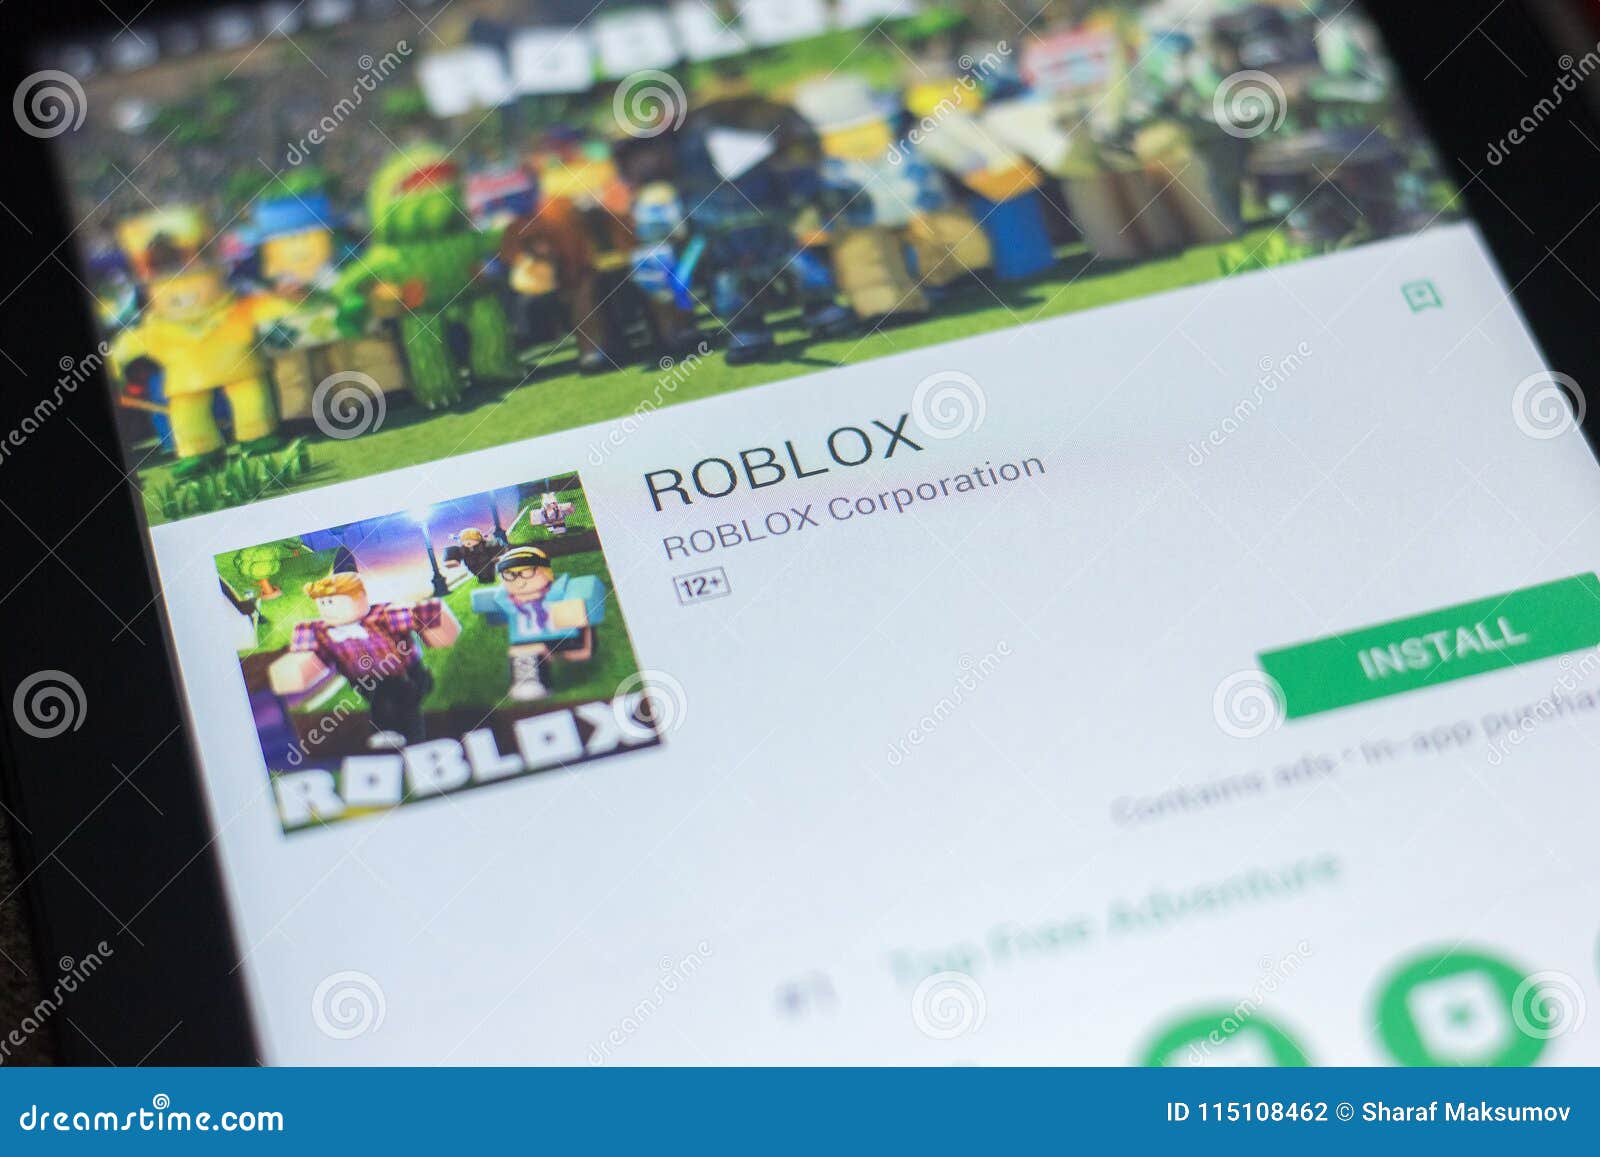 Roblox Photos Free Royalty Free Stock Photos From Dreamstime - roblox download computer